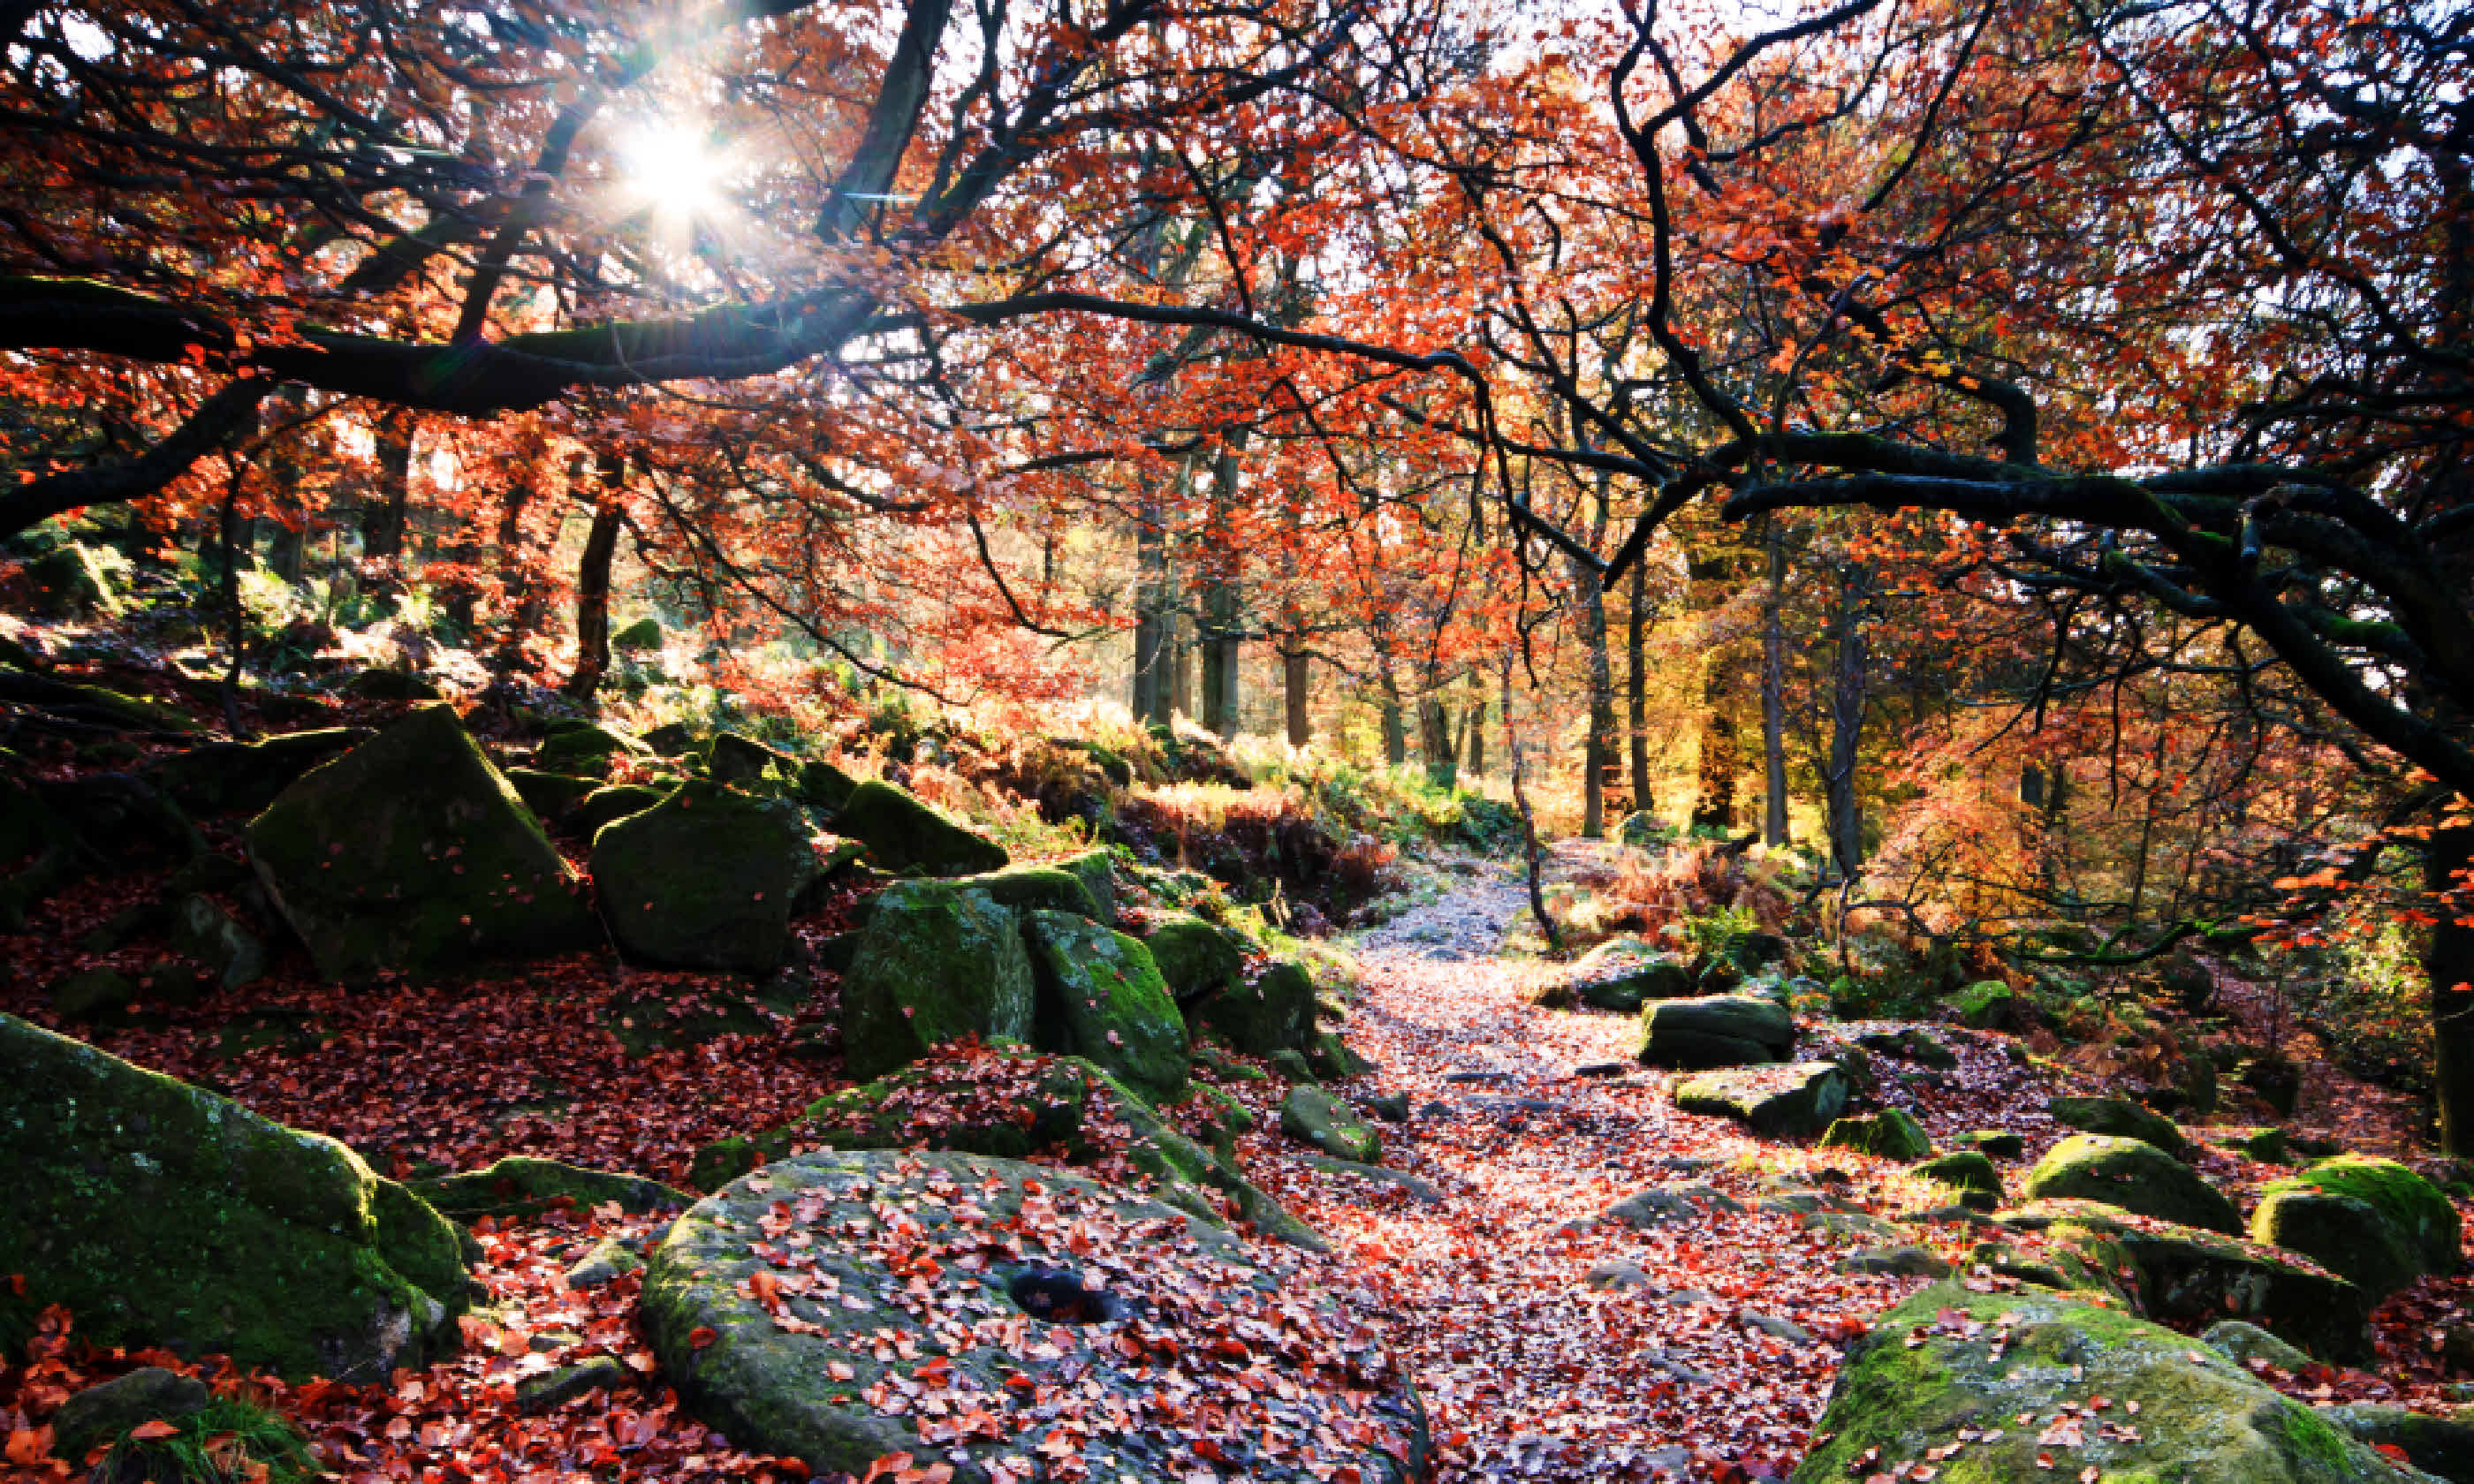 Padley Gorge in its autumn glory (Shutterstock)